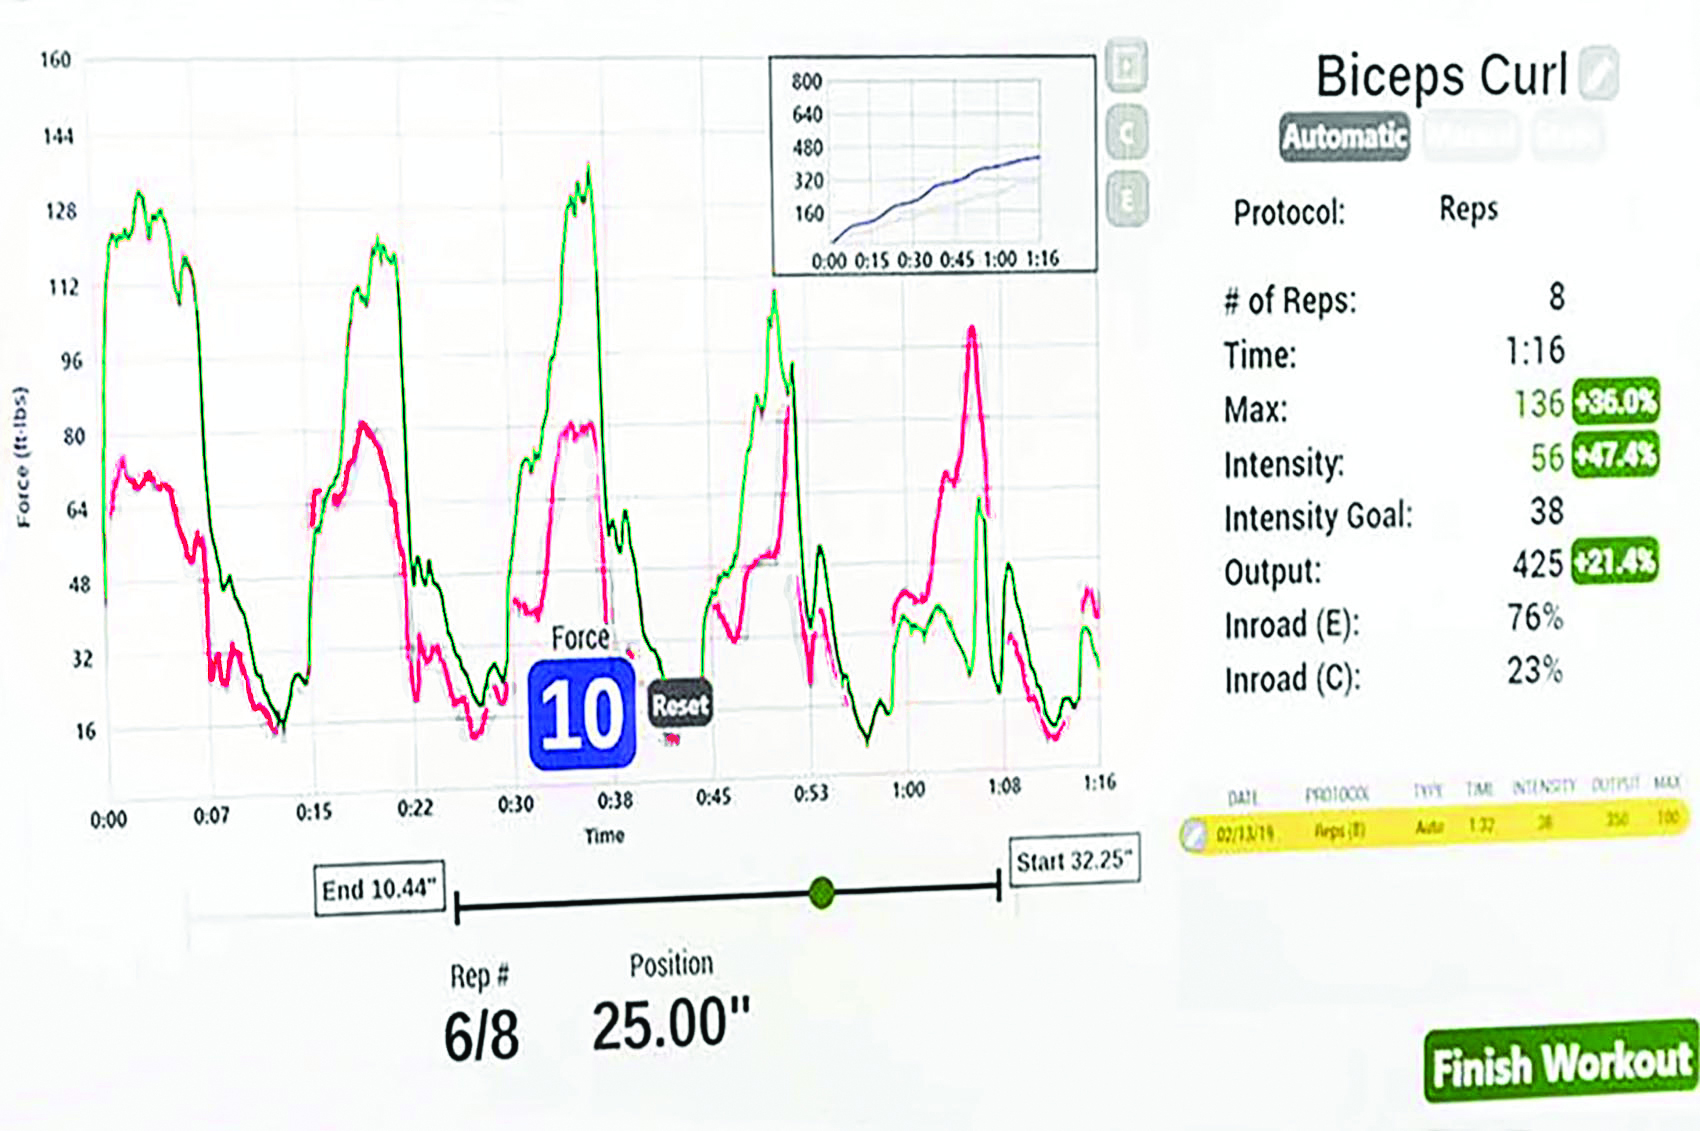 Example graph from the ARX machine showing clients past and current performance on the Bicep Curl.